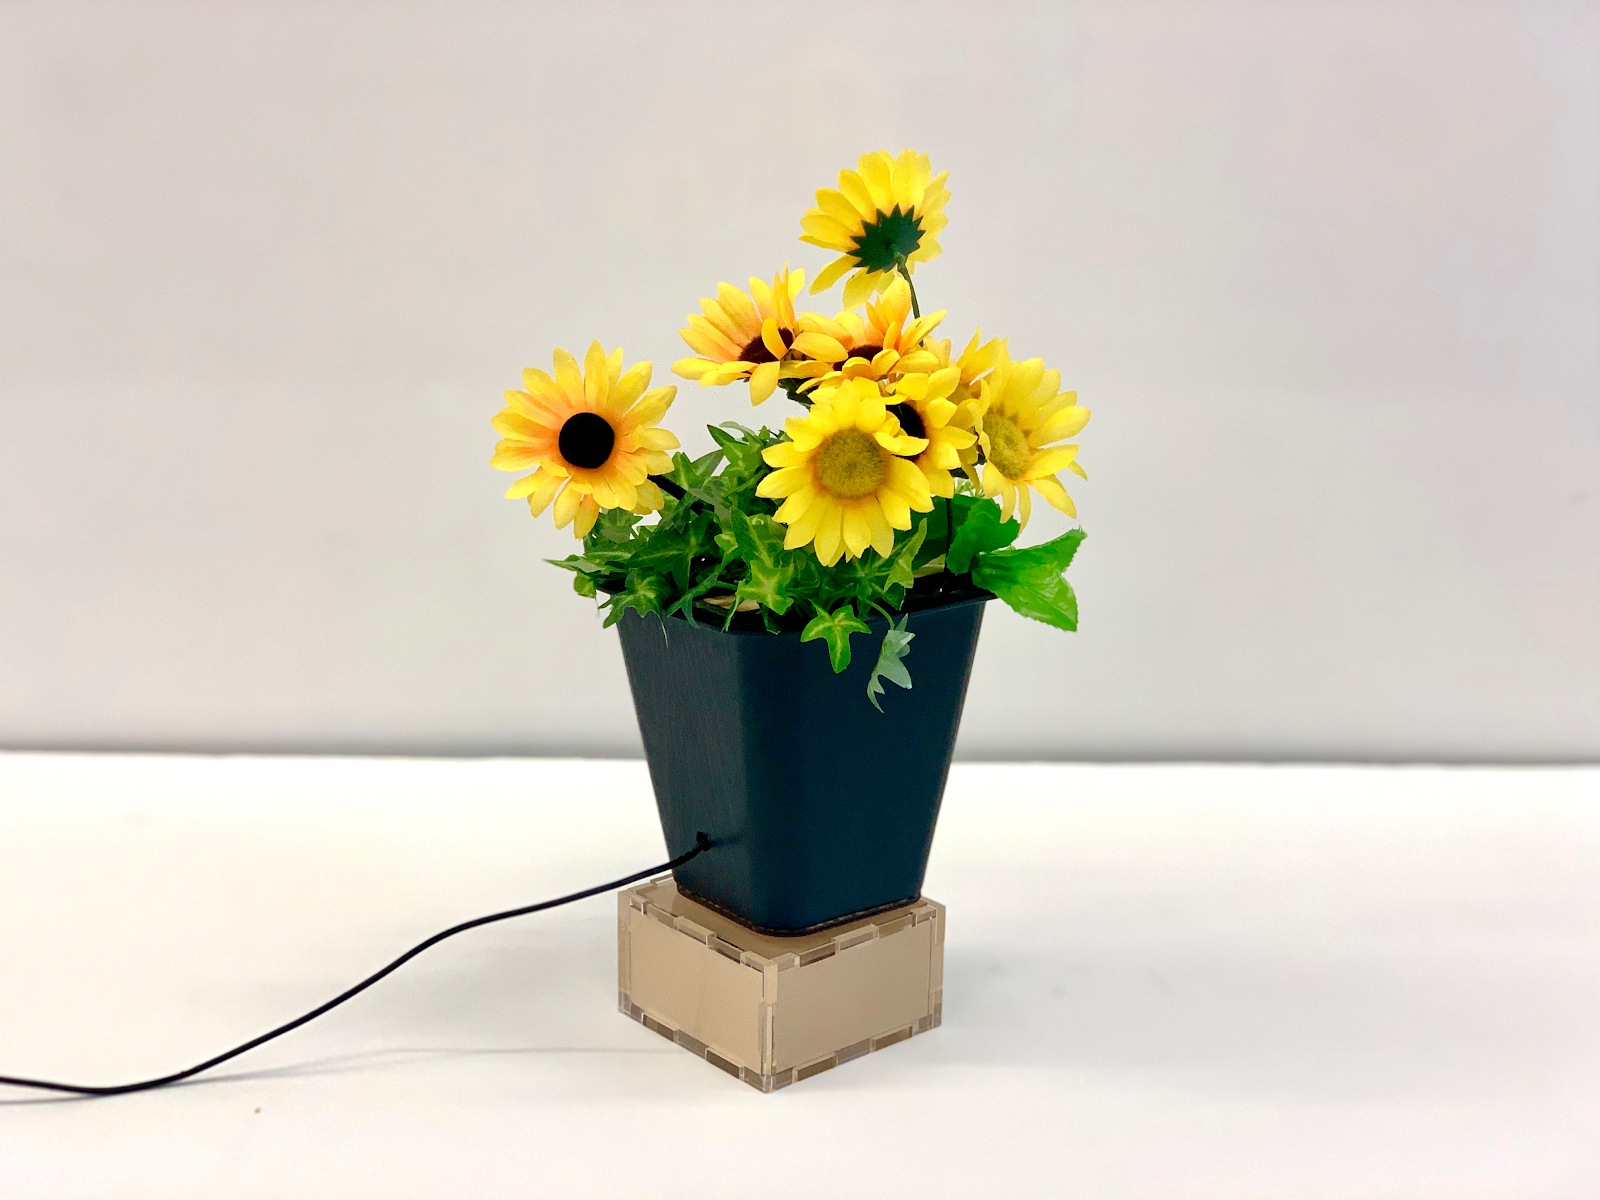 Soulflower cover image: sunflowers in pot on stand